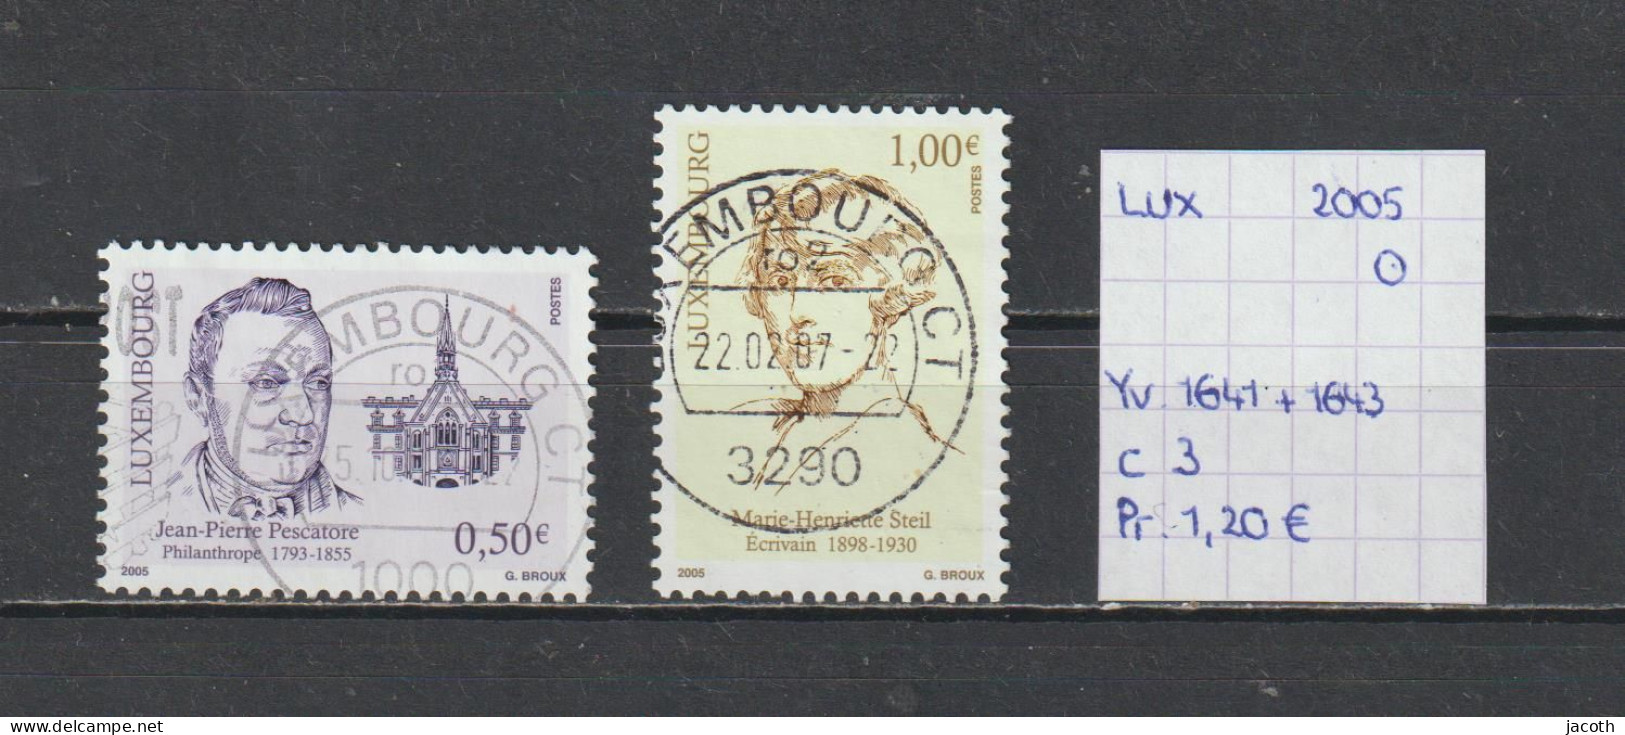 (TJ) Luxembourg 2005 - YT 1641 + 1643 (gest./obl./used) - Used Stamps